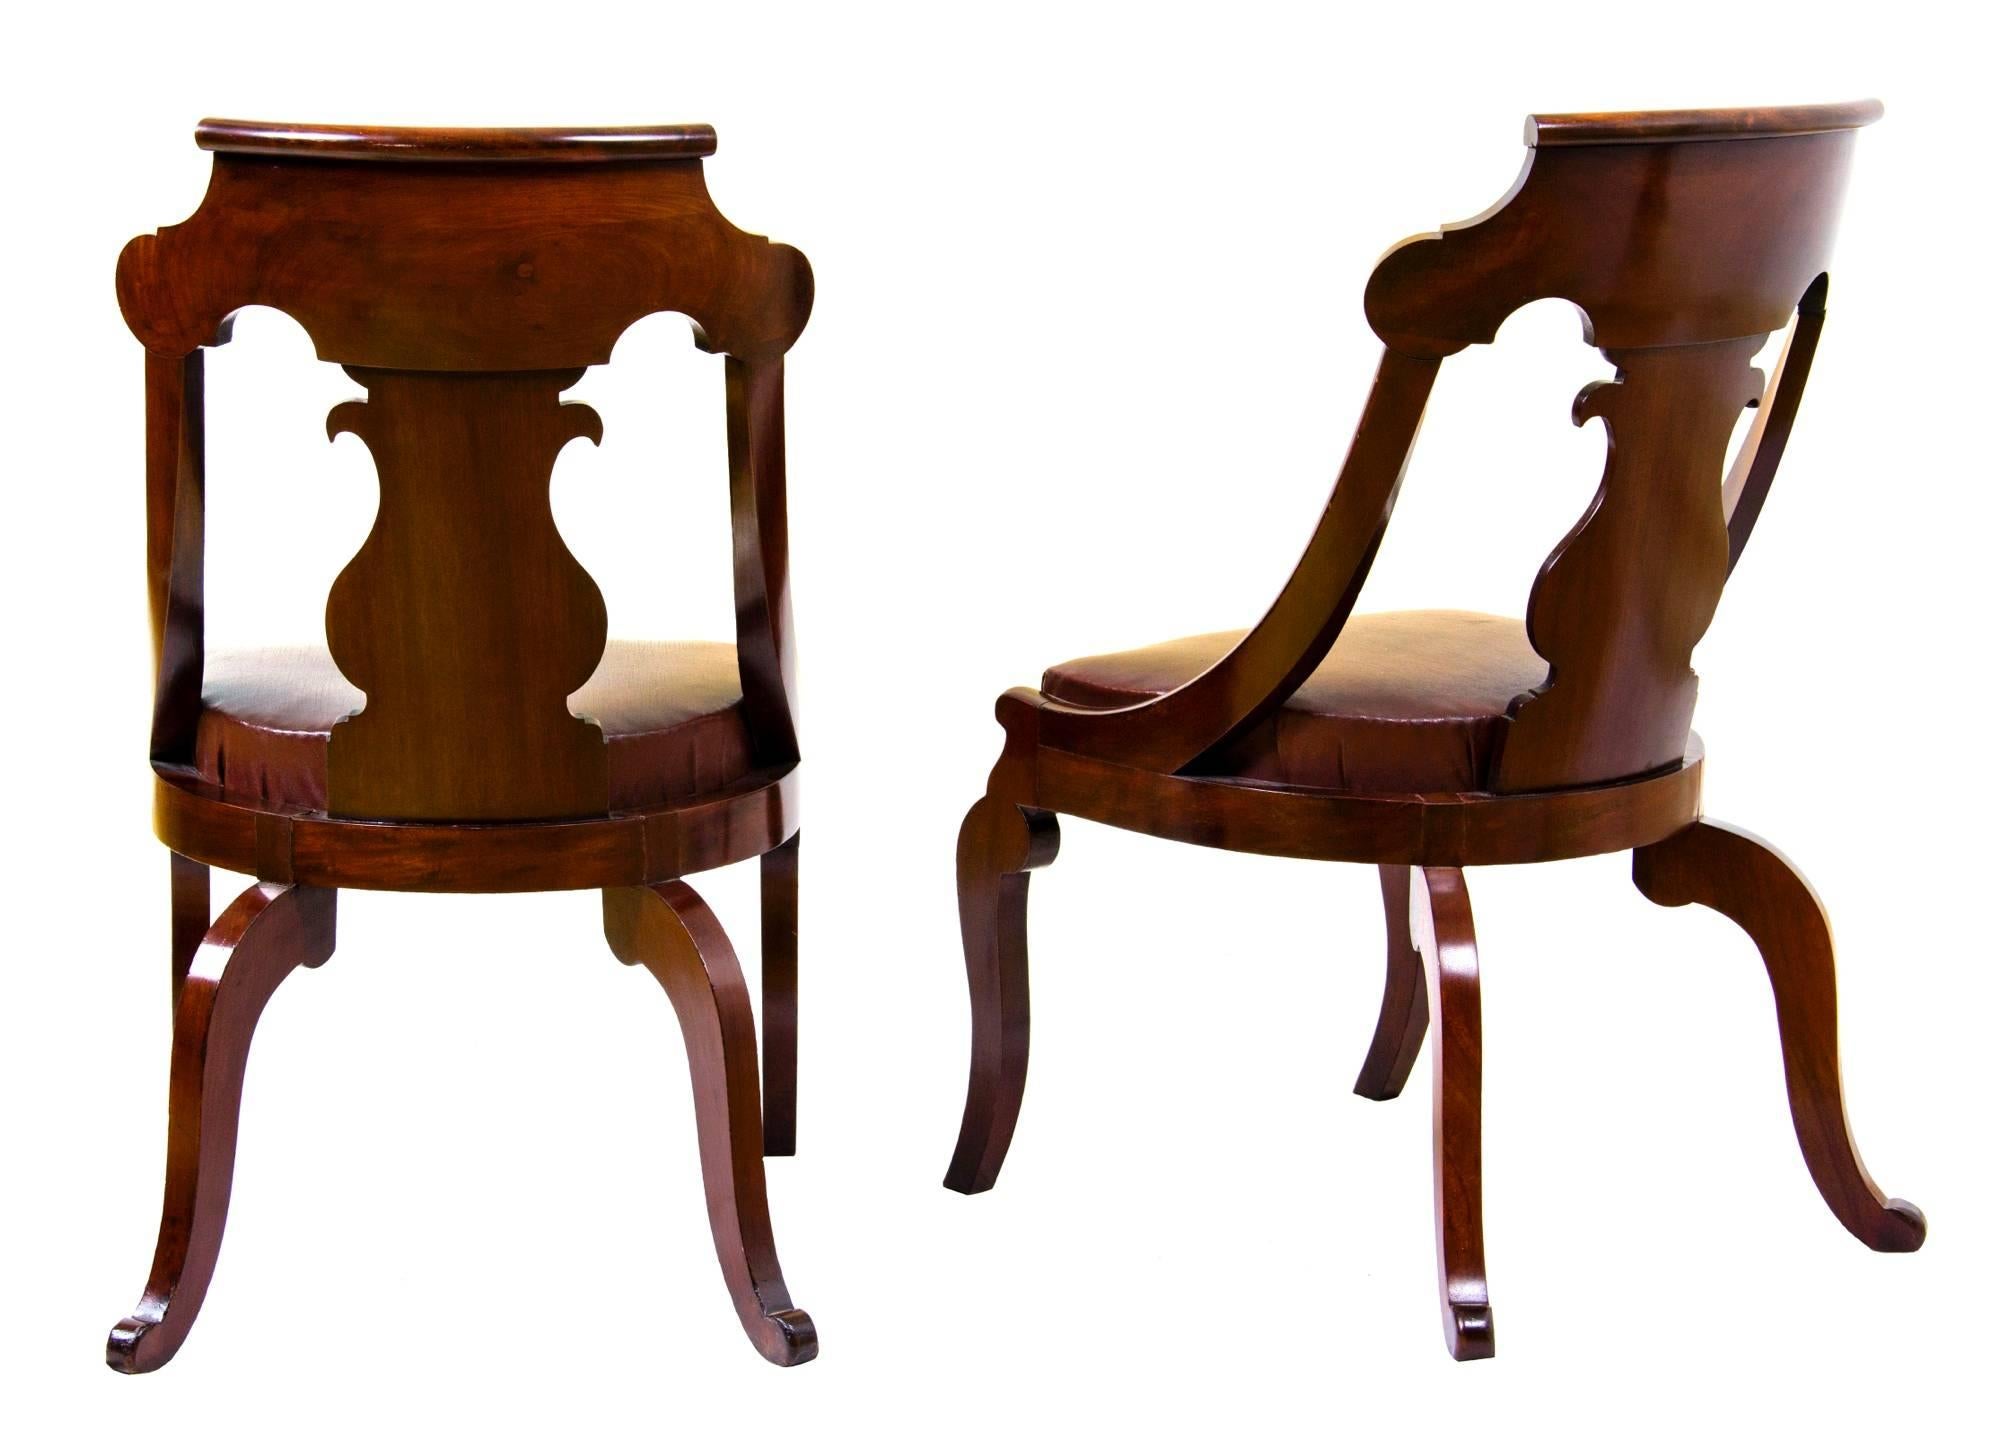 These dining/side chairs are among the most developed of their type in America during the late 1st quarter/early second quarter of the 19th century. Note the side supports; how they sweep to the front legs, these chairs are heavy and substantial in